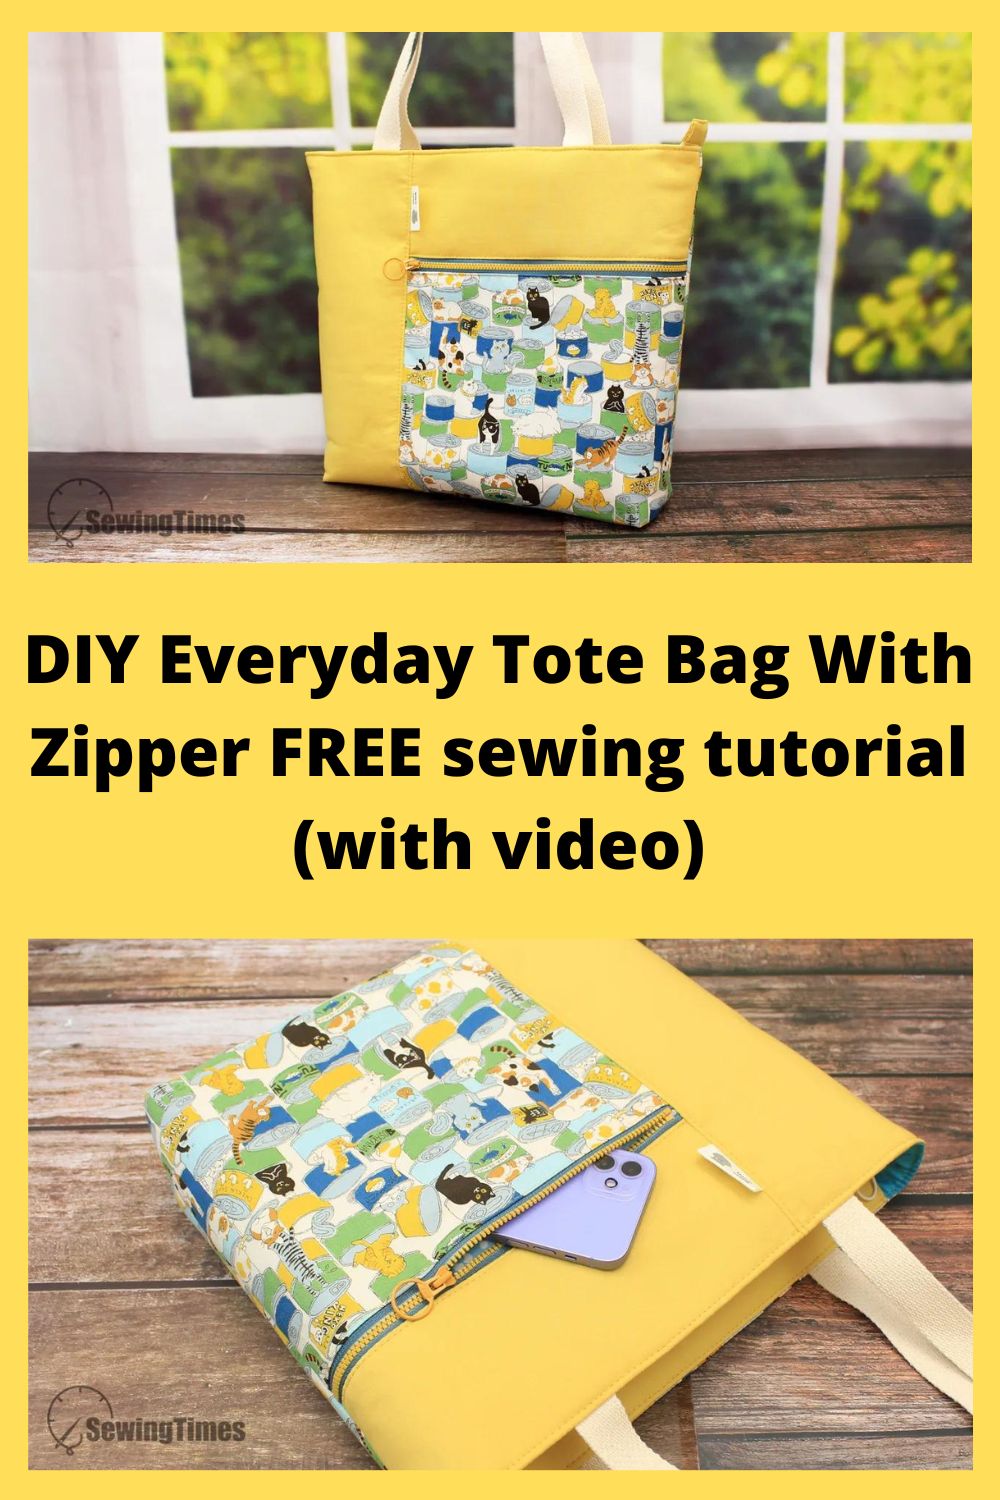 DIY Everyday Tote Bag With Zipper FREE sewing tutorial (with video)